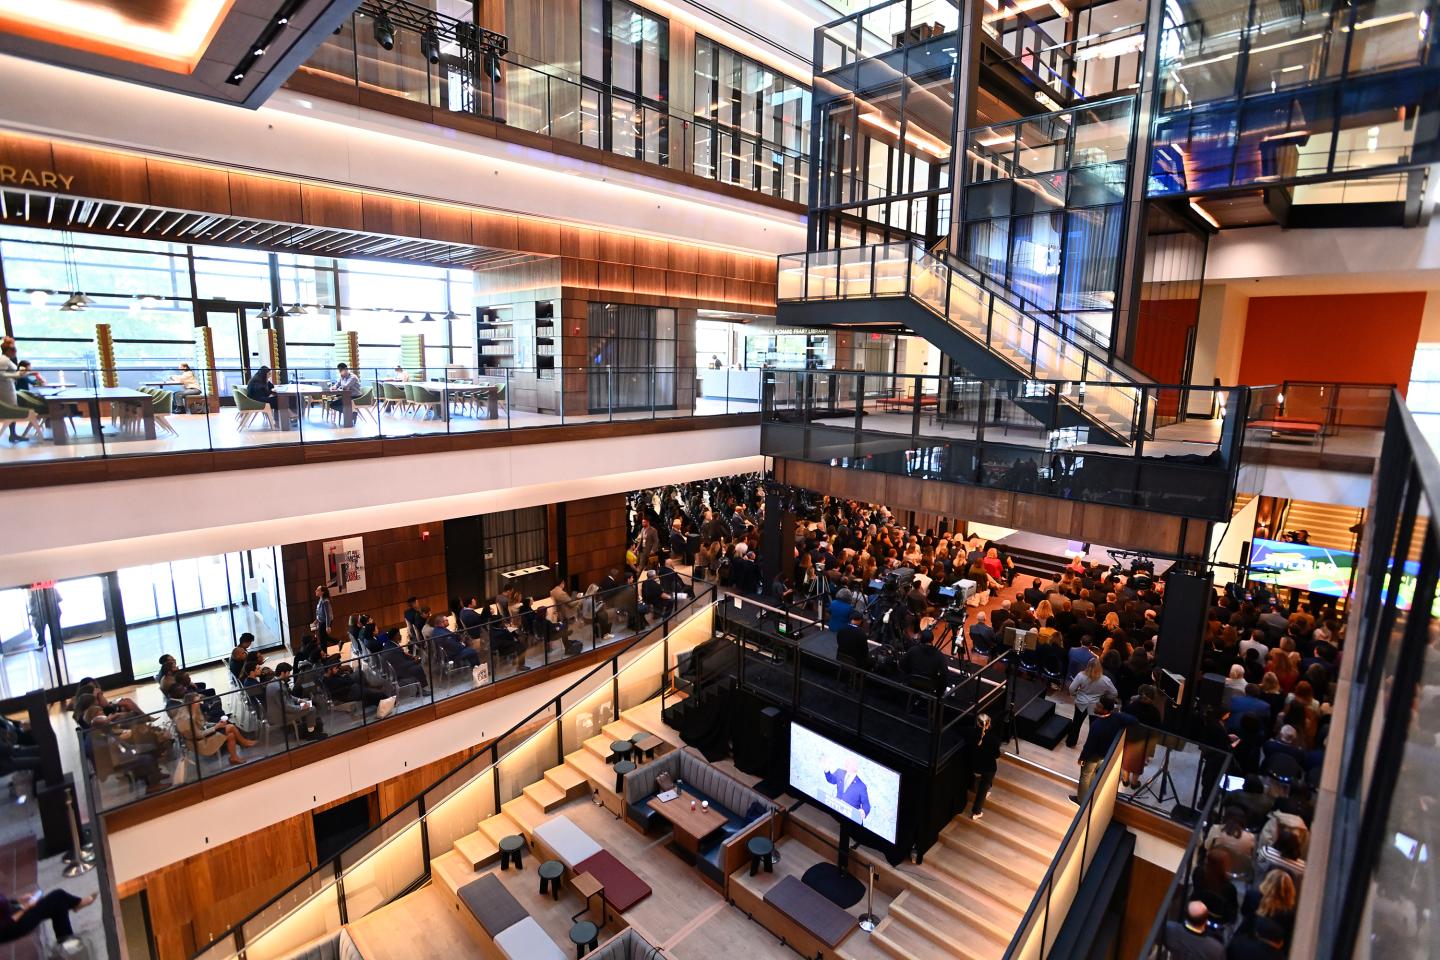 A large crowd is seated in the multistory atrium of a modern building